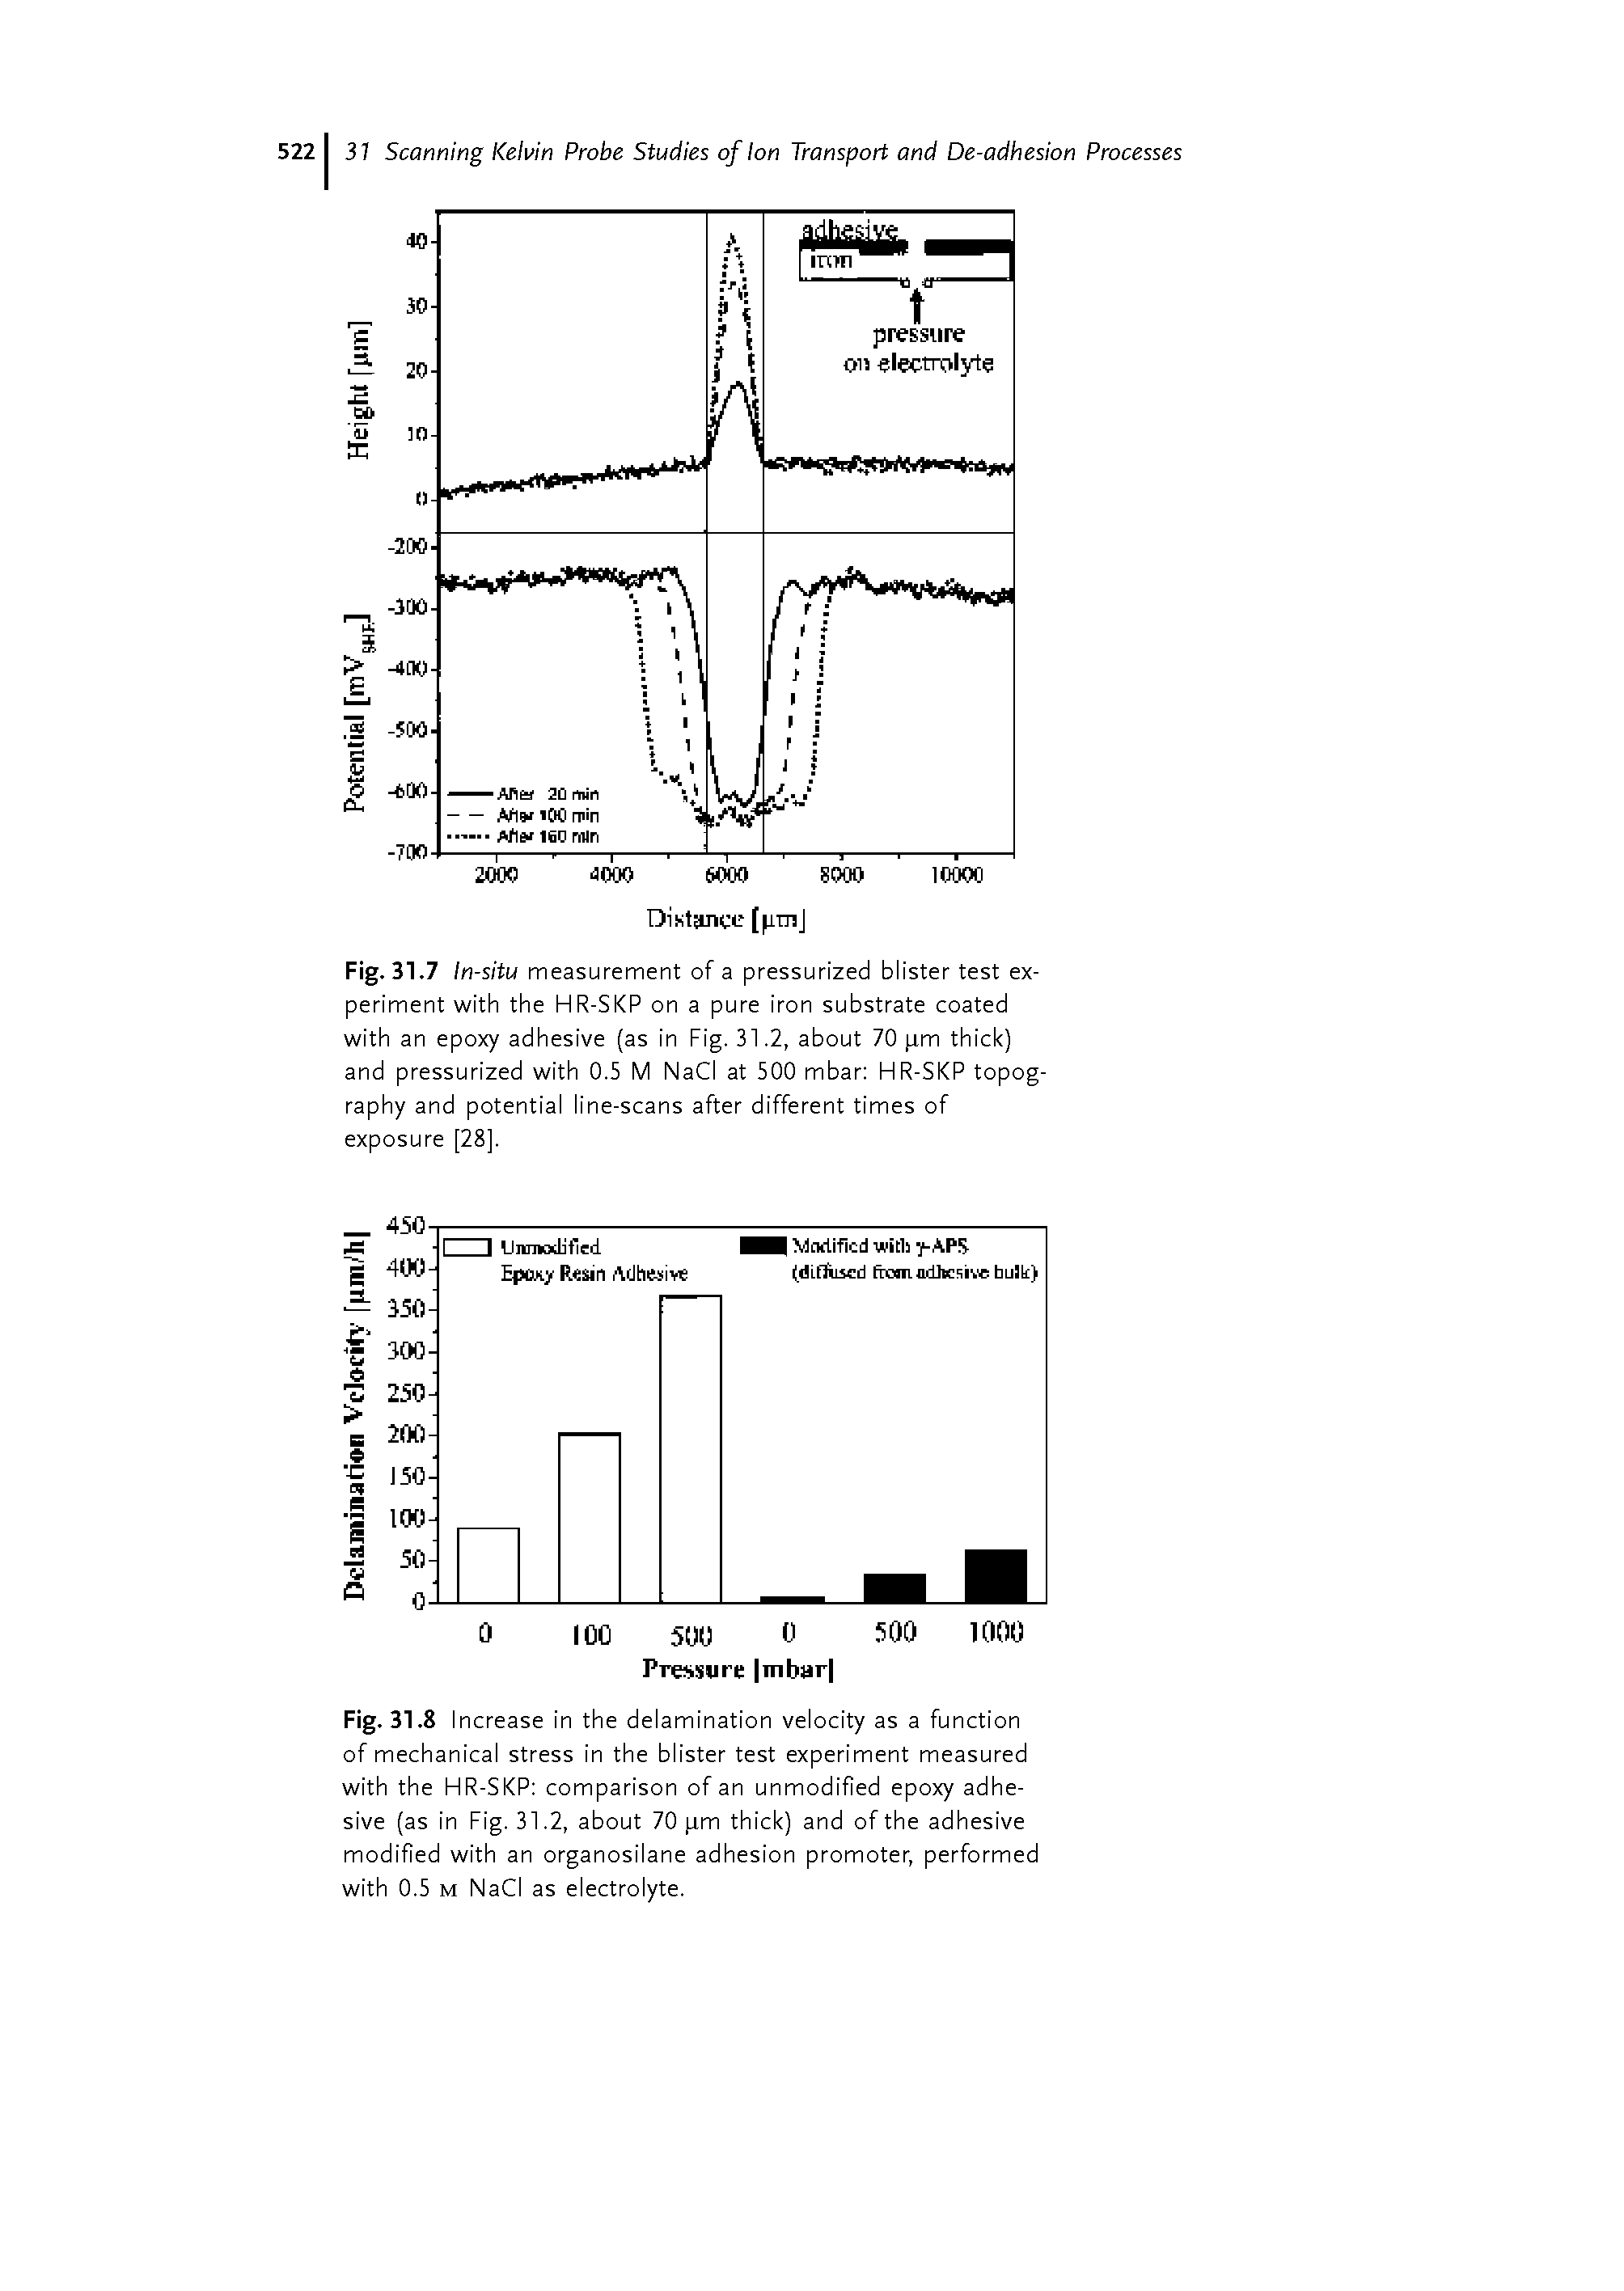 Fig. 31. 8 Increase in the delamination velocity as a function of mechanical stress in the blister test experiment measured with the HR-SKP comparison of an unmodified epoxy adhesive (as in Fig. 31.2, about 70 p,m thick) and of the adhesive modified with an organosilane adhesion promoter, performed with 0.5 M NaCi as electrolyte.